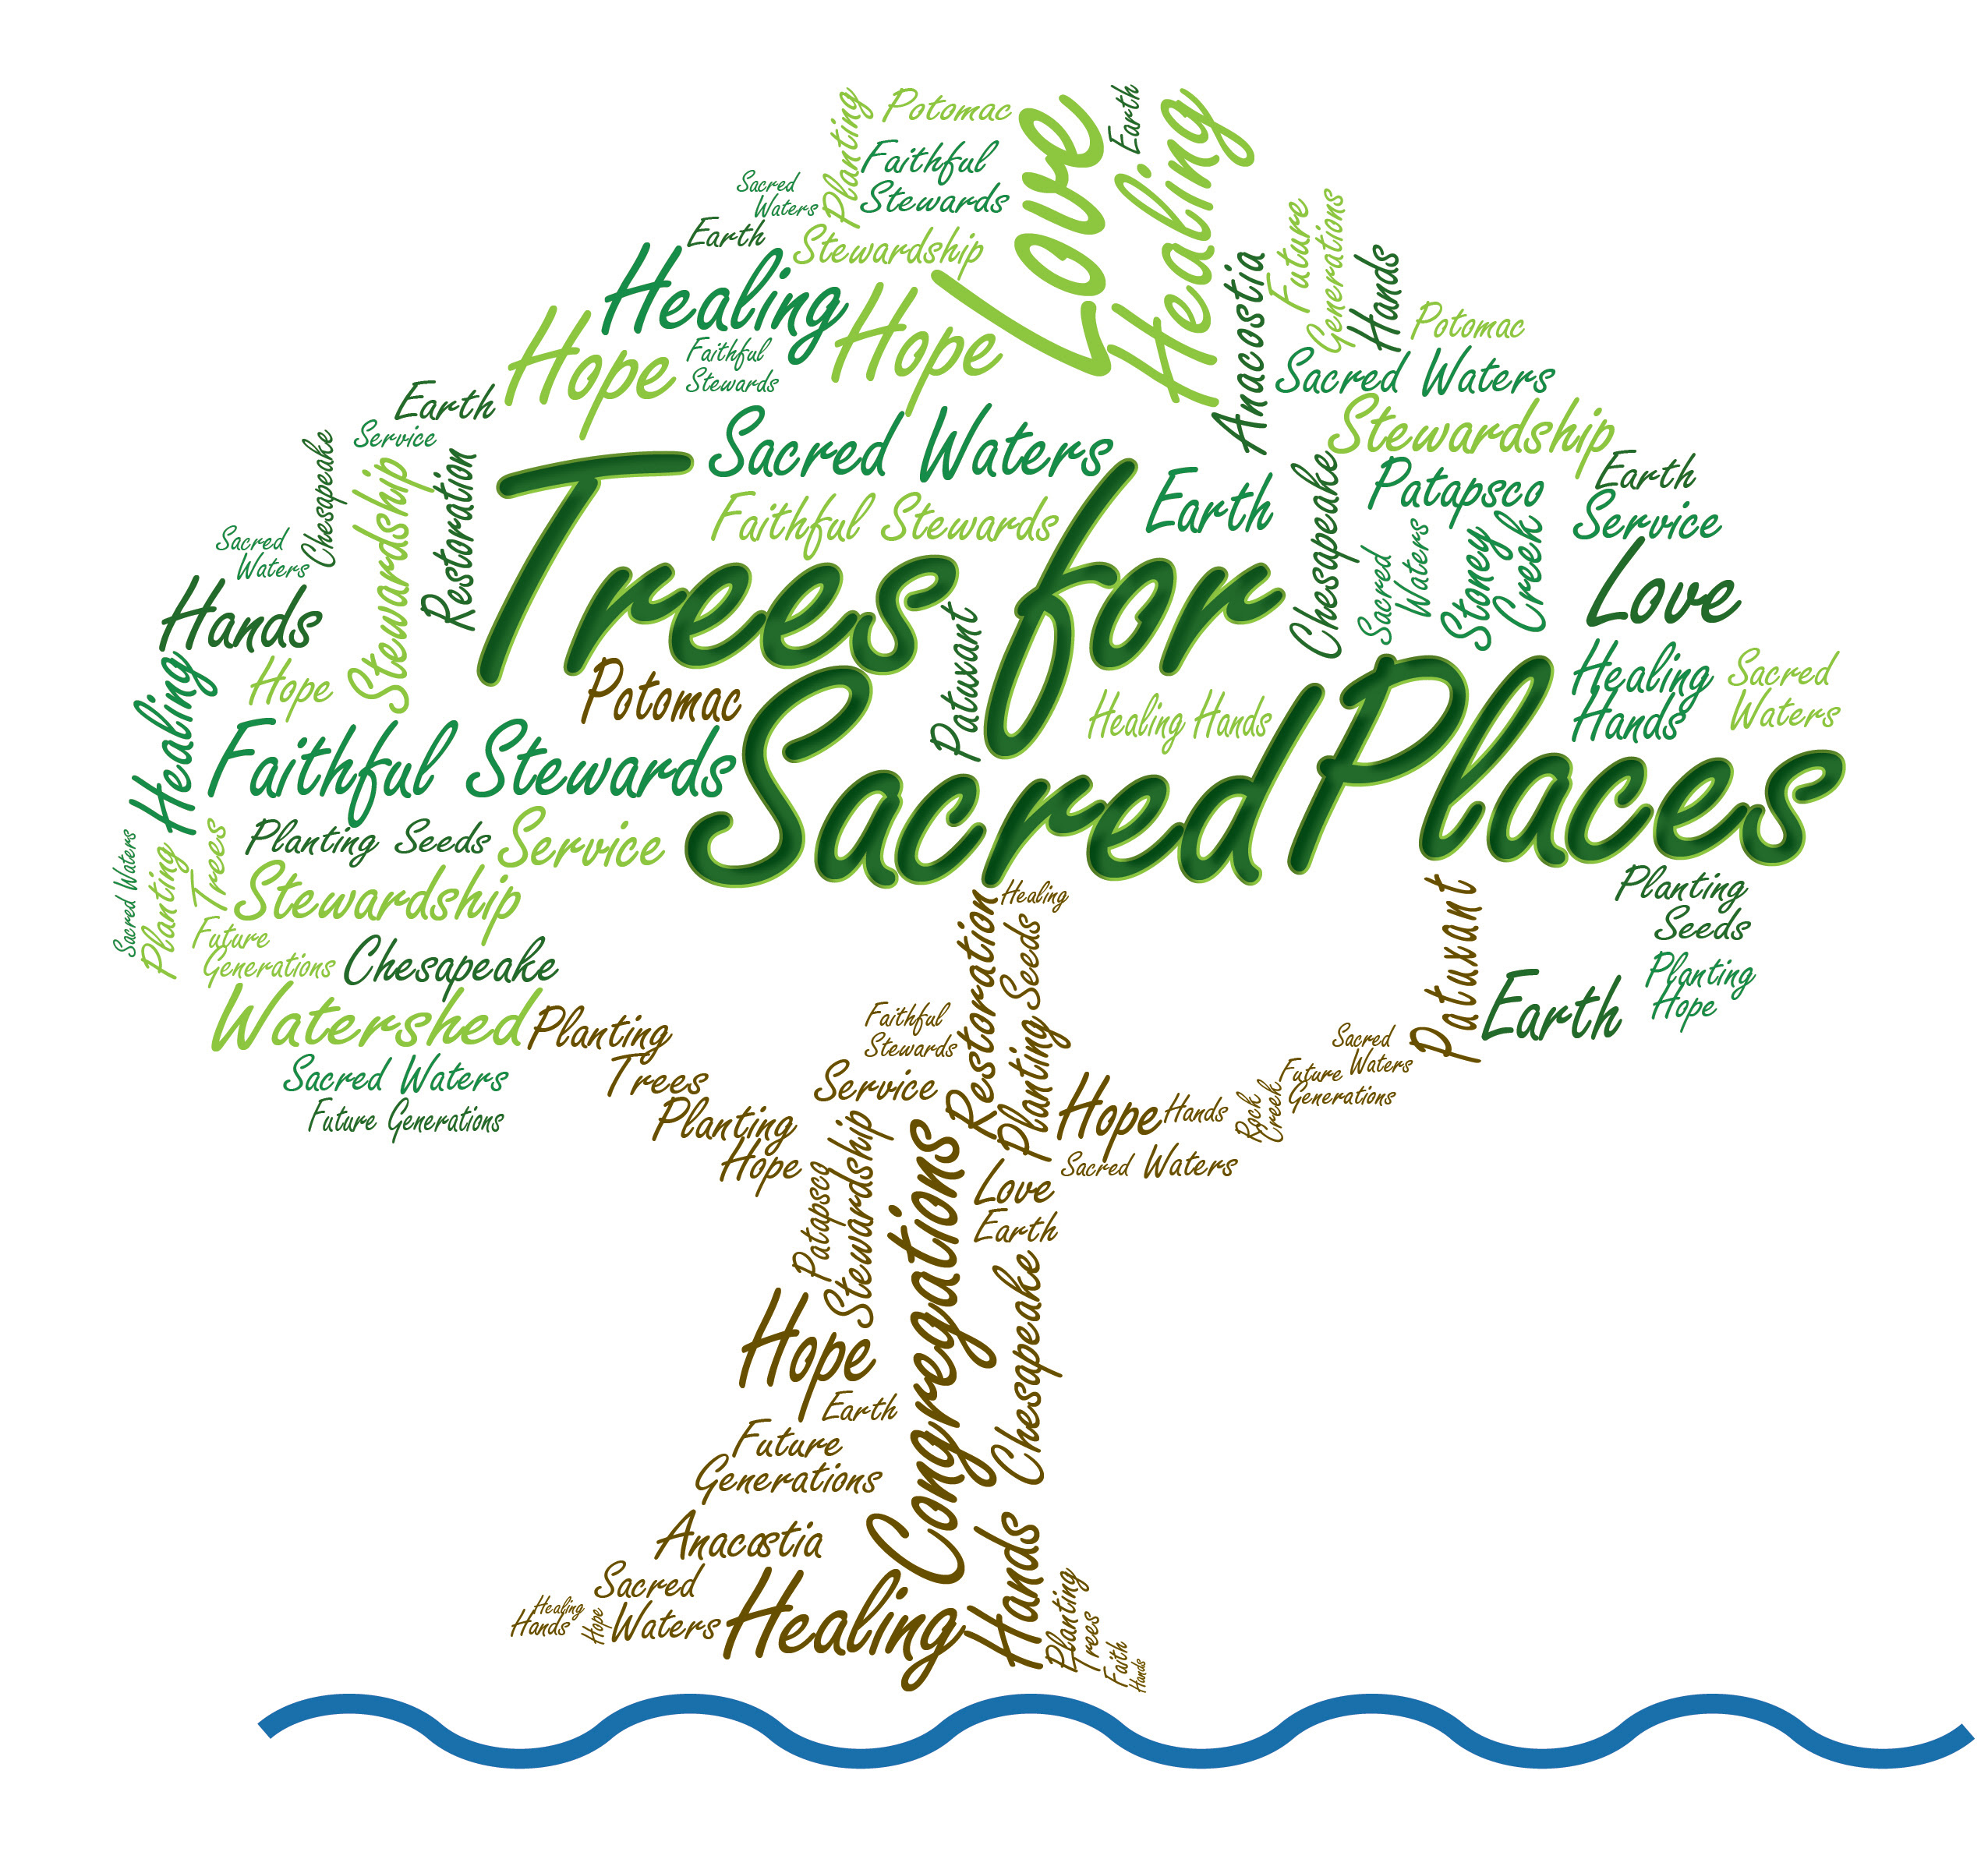 Trees_For_Sacred_Places_logo.jpg